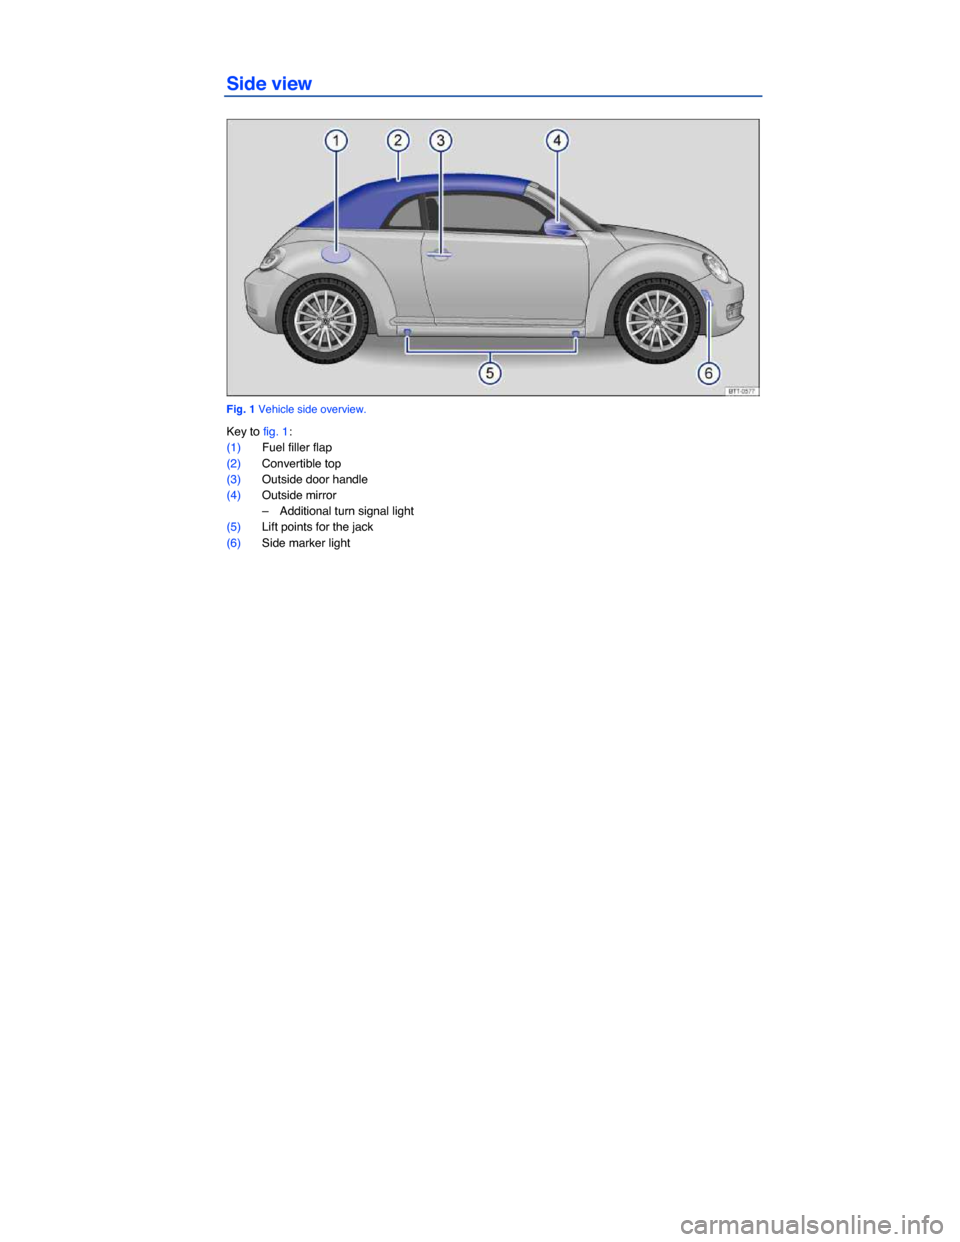 VOLKSWAGEN BEETLE CONVERTIBLE 2015 3.G Owners Manual Side view 
 
Fig. 1 Vehicle side overview. 
Key to fig. 1: 
(1) Fuel filler flap  
(2) Convertible top  
(3) Outside door handle  
(4) Outside mirror  
–  Additional turn signal light  
(5) Lift poi